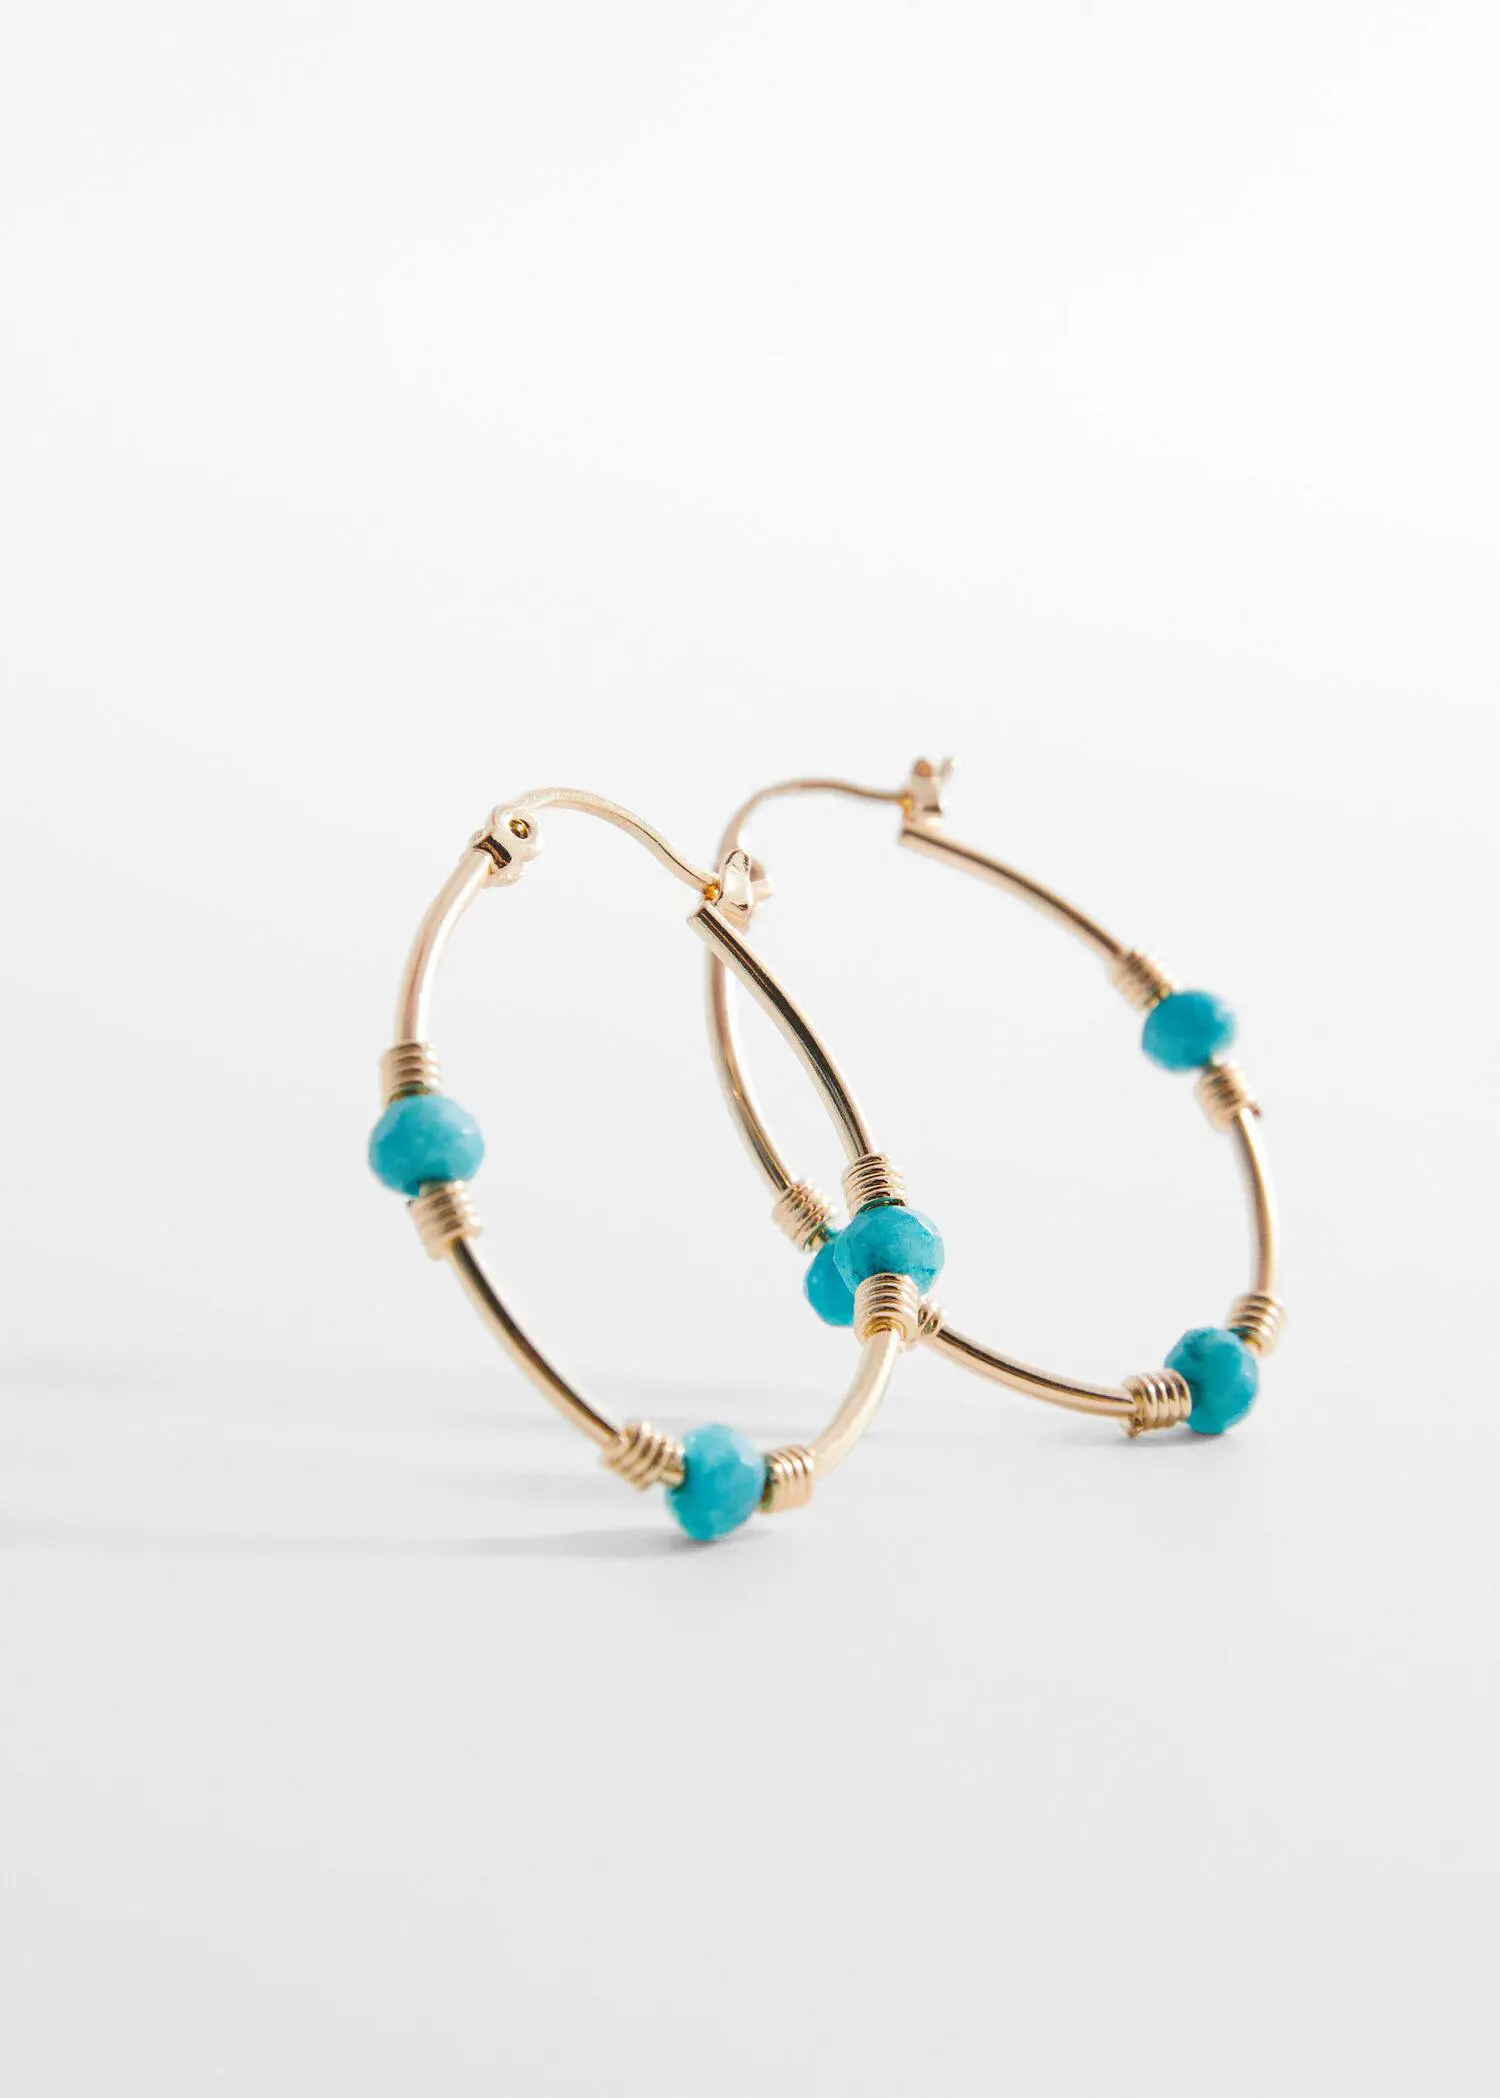 Mango Stone hoop earrings. a close up of a pair of earrings on a table 